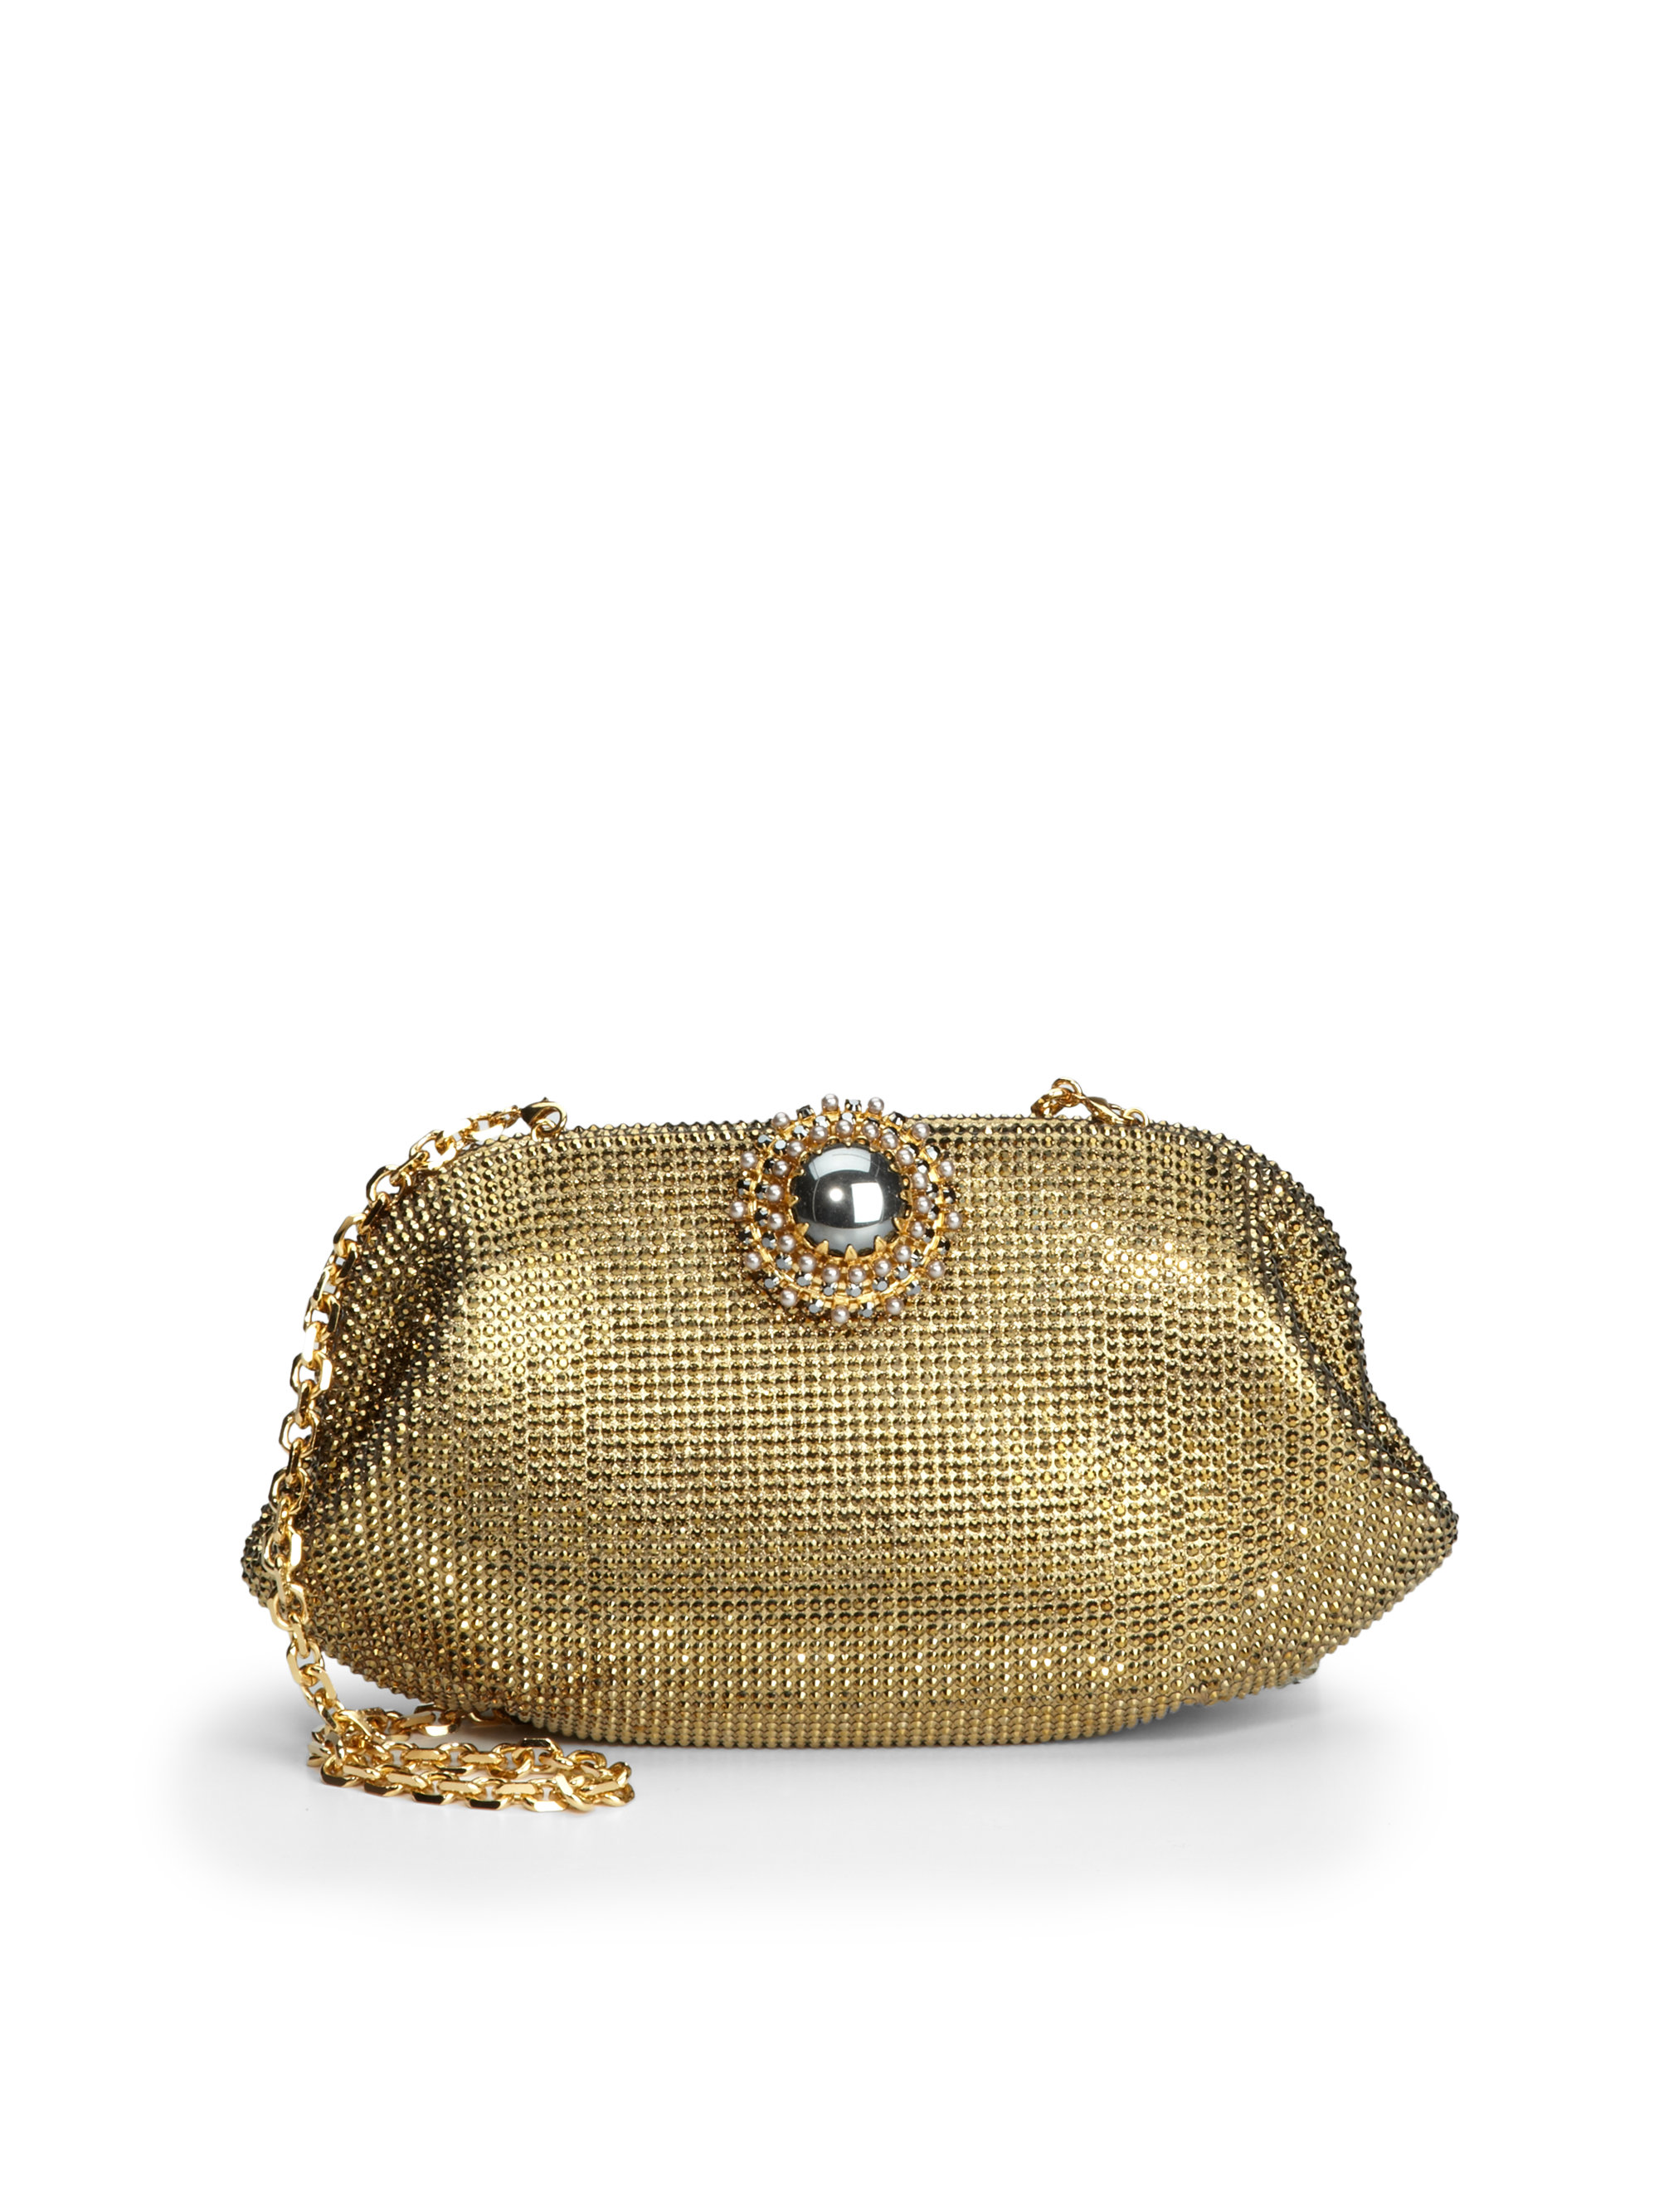 Judith Leiber Yasmin Crystal Studded Patent Leather Clutch in Natural ...